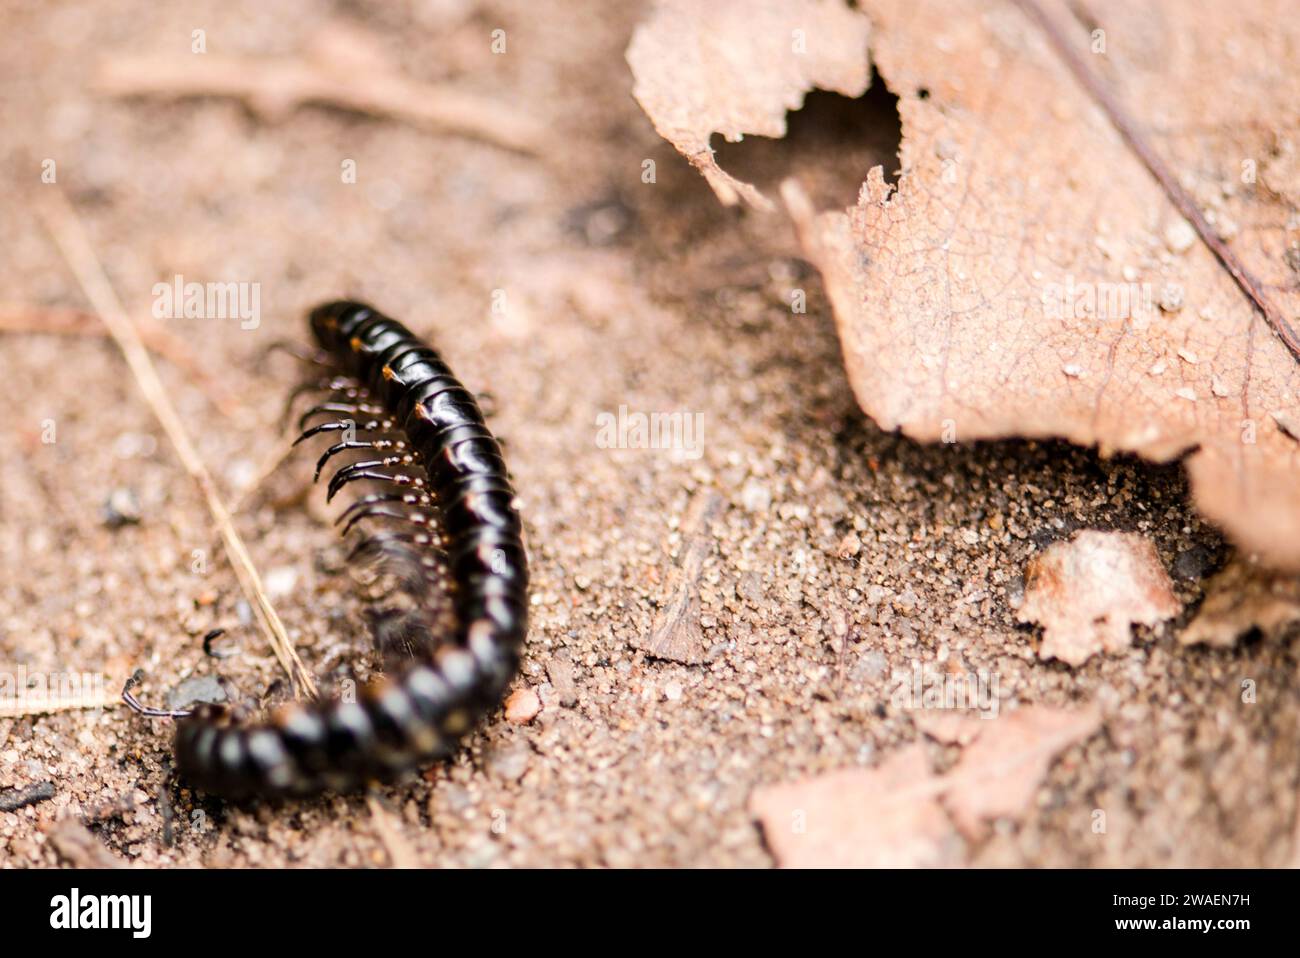 A close-up of a small black insect resting on a patch of dirt Stock Photo